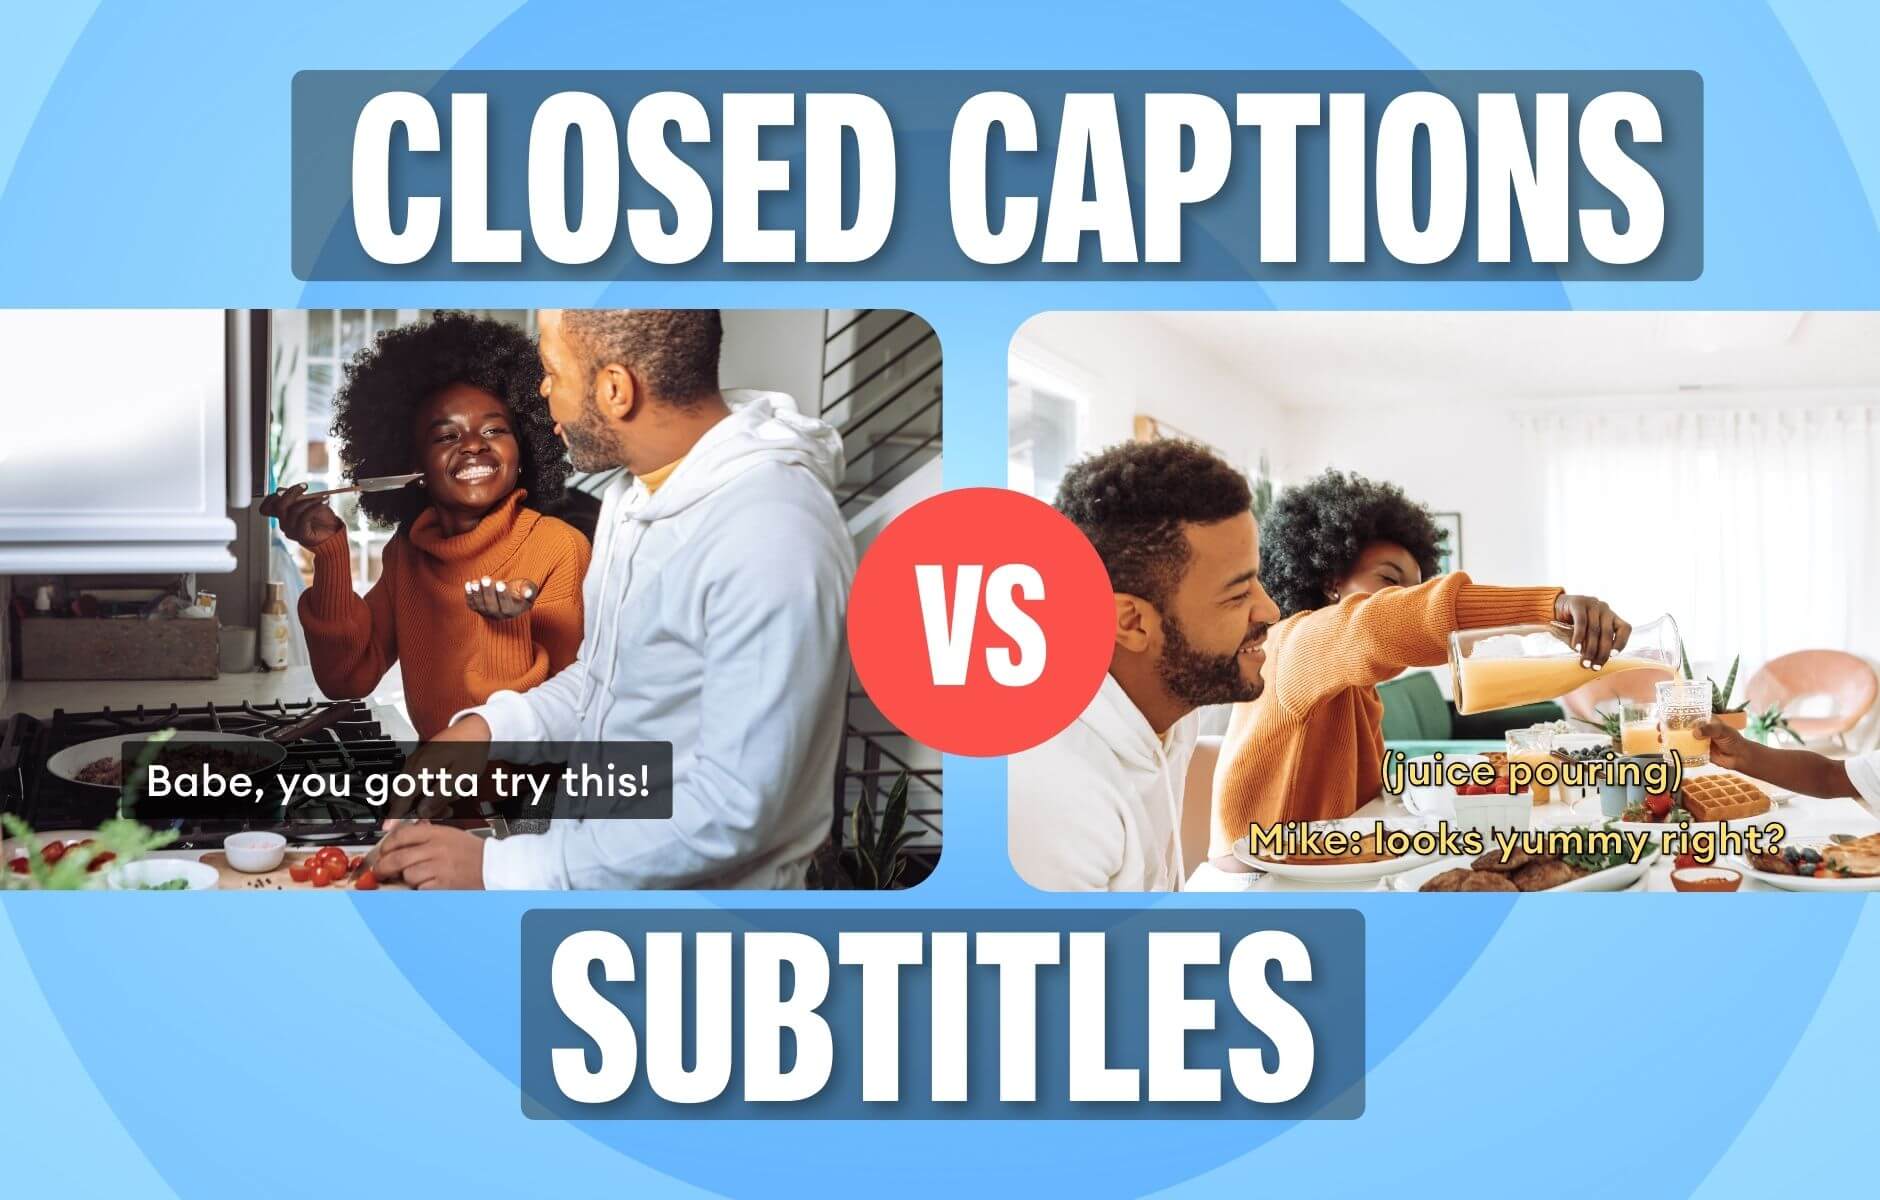 What Is The Difference Between Closed Captions And Subtitles